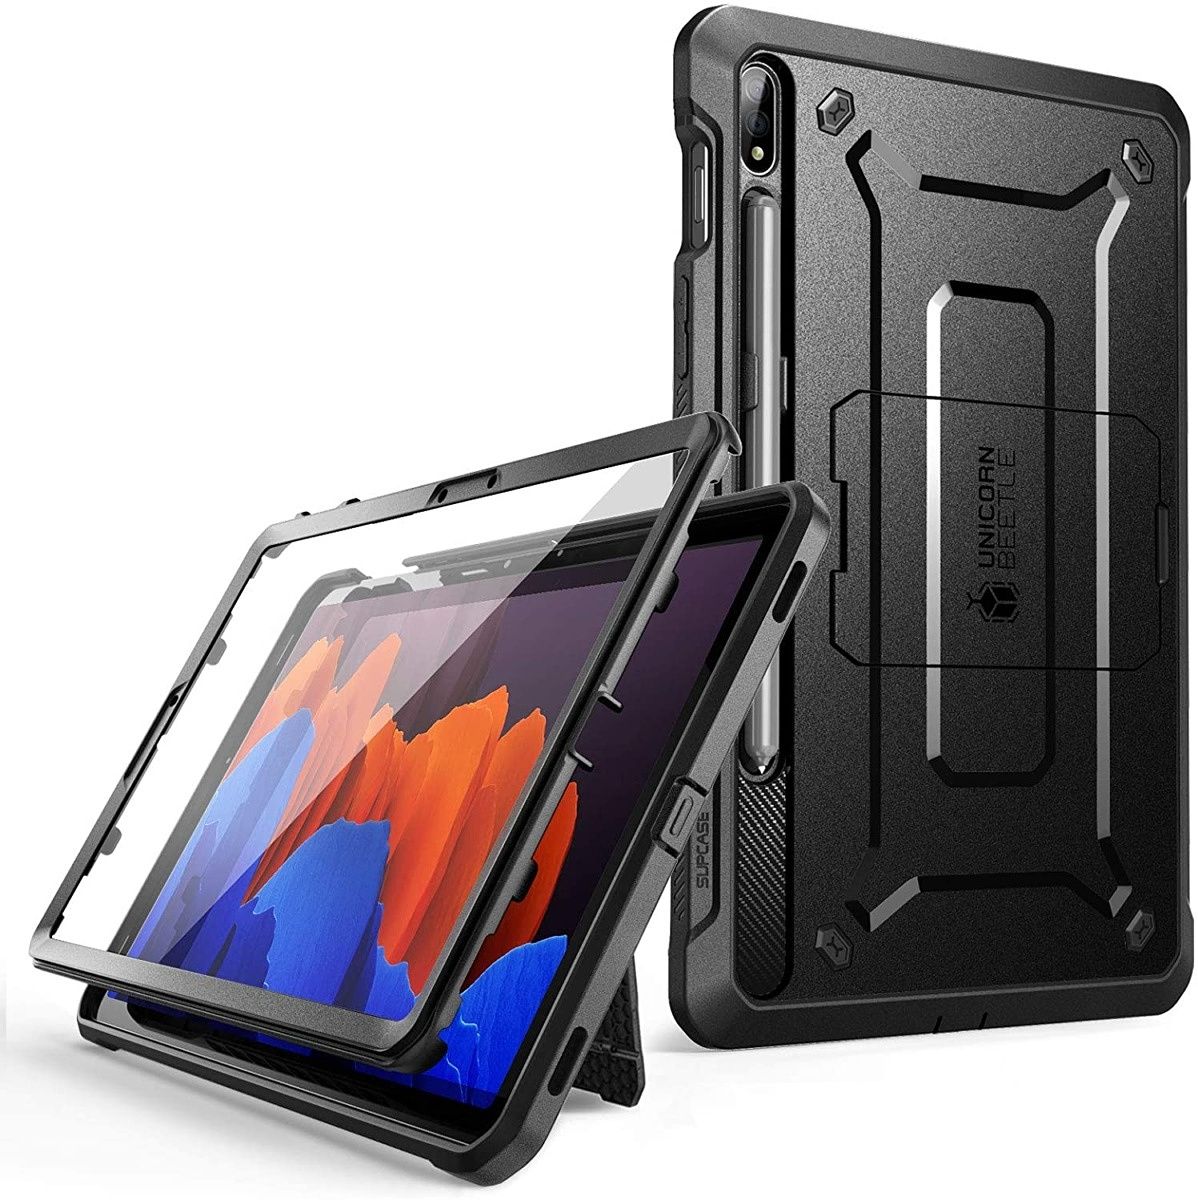 This case offers 360º protection, thanks to its built-in screen protector. It has an S Pen holder as well, so you don't have to worry about that.